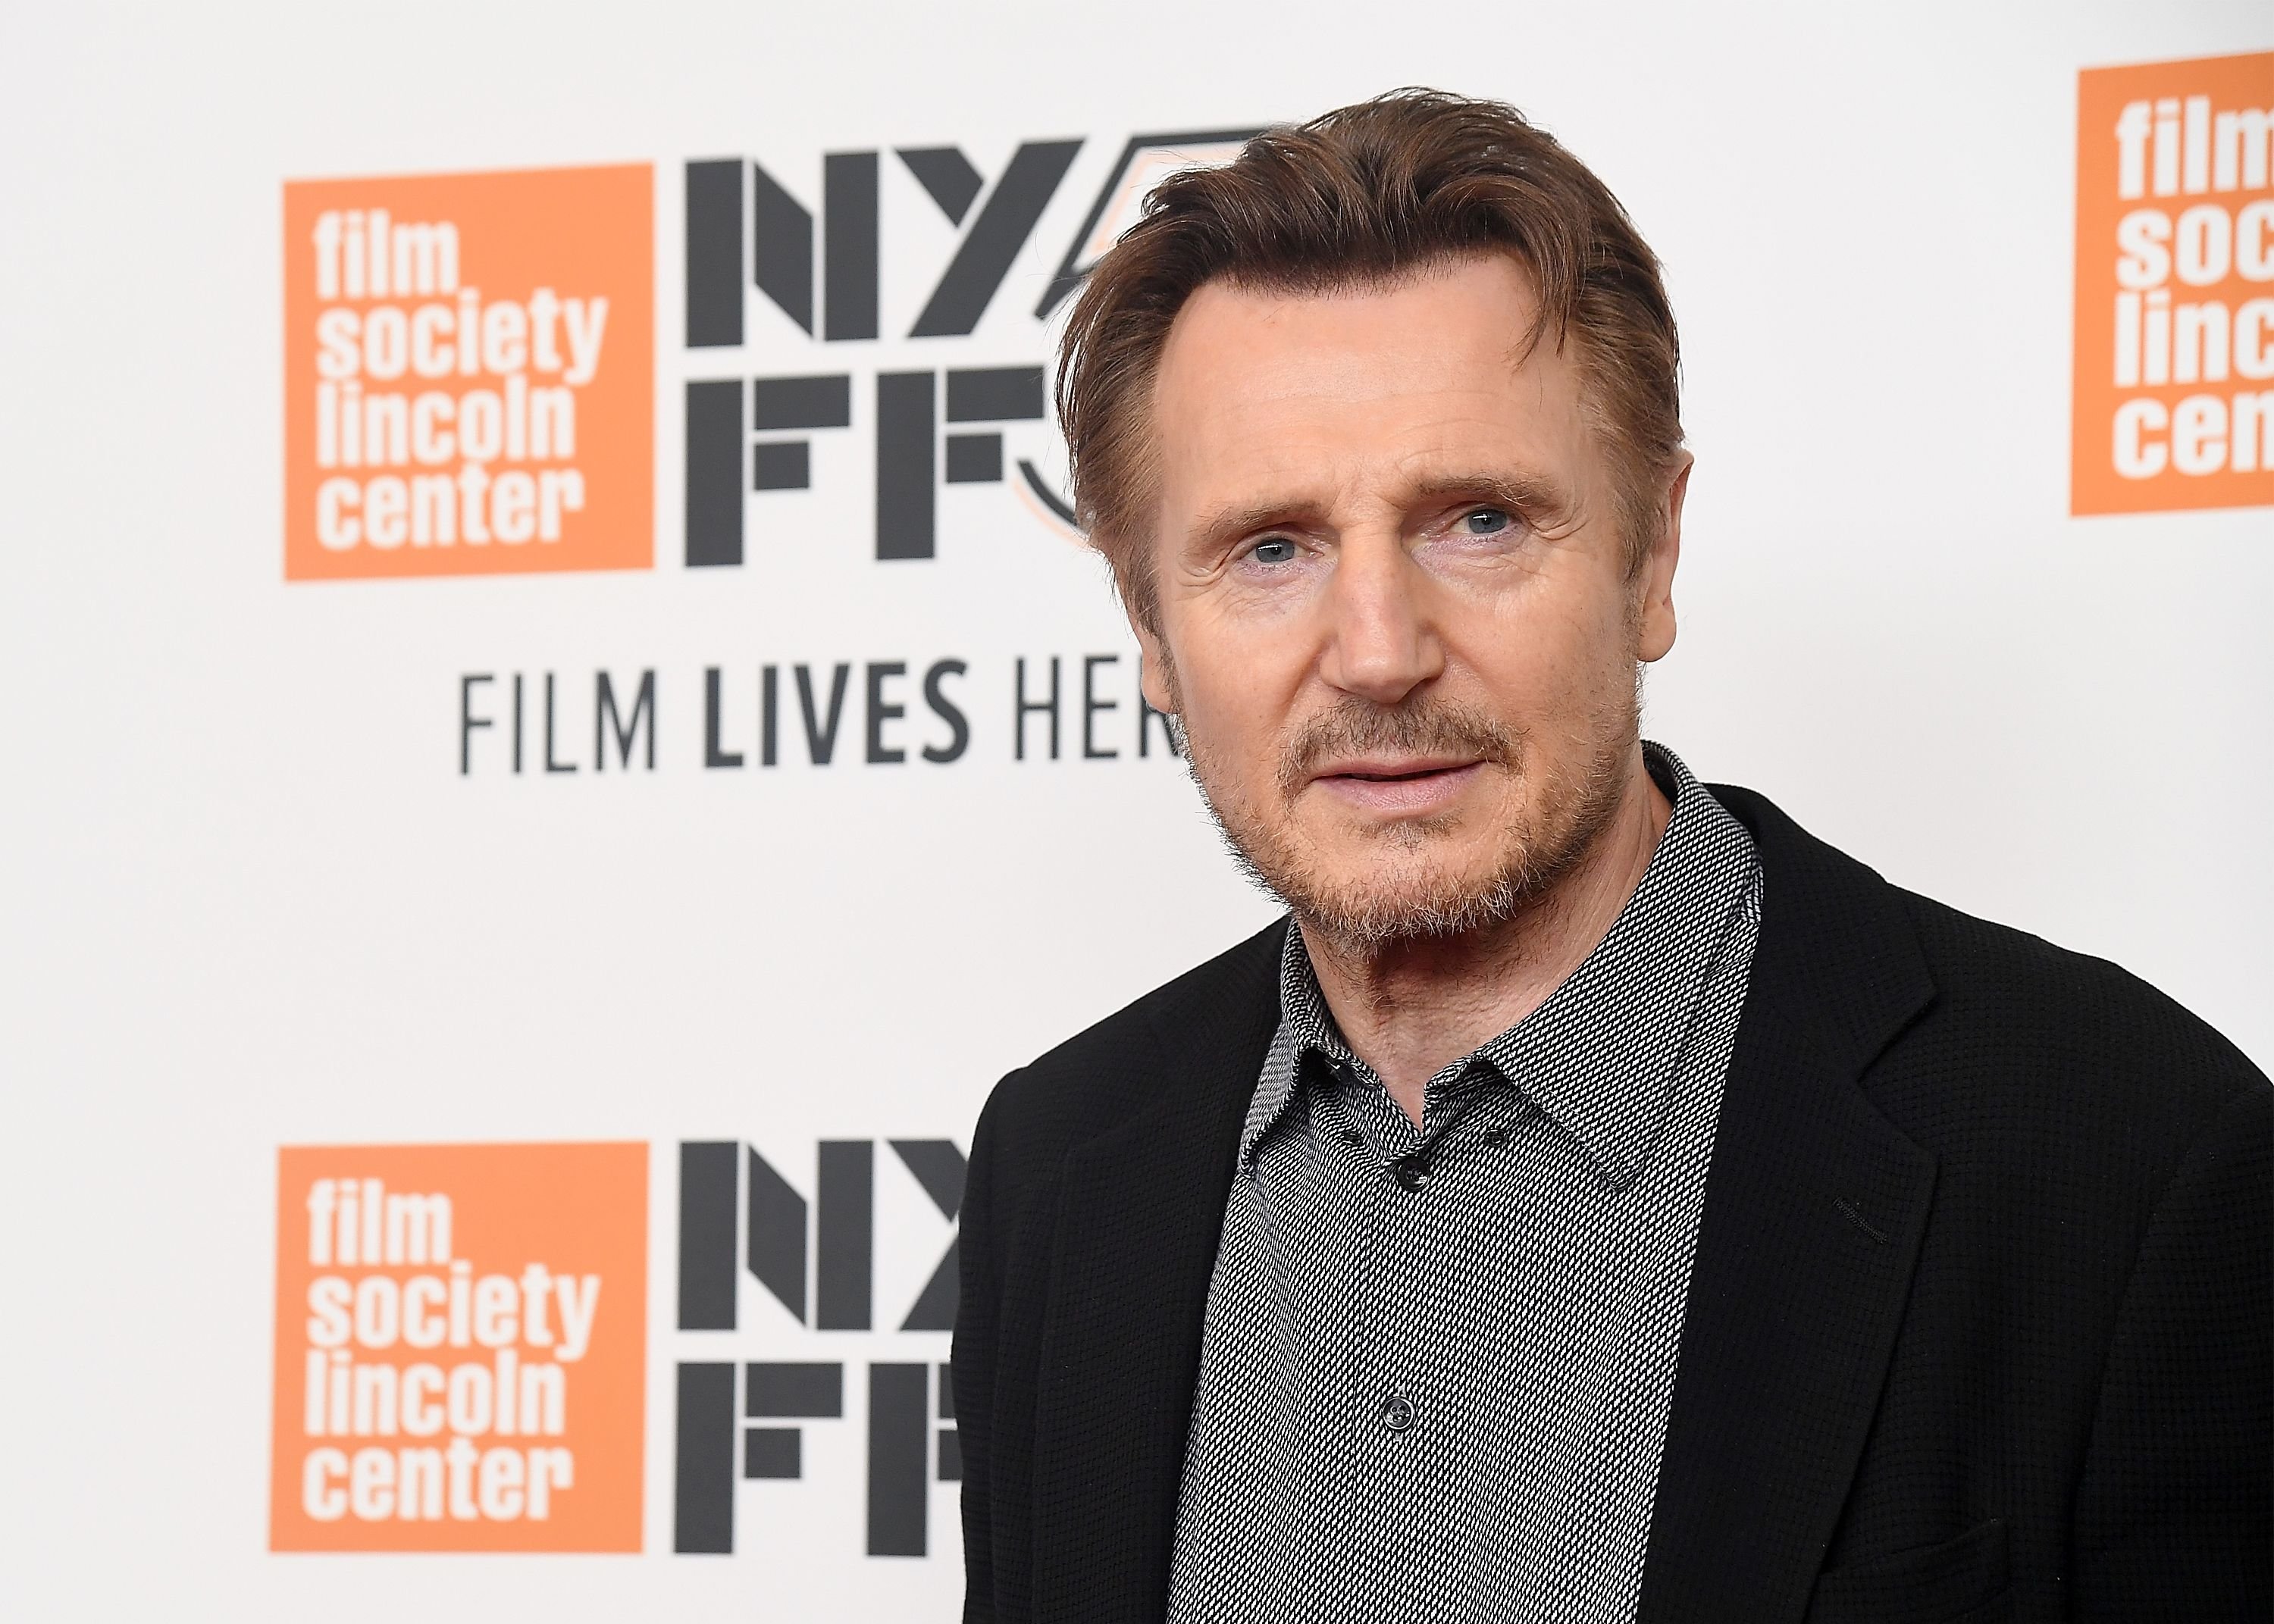 Liam Neeson at the screening of "The Ballad of Buster Scruggs" during the 56th New York Film Festival on October 4, 2018 | Photo: Getty Images